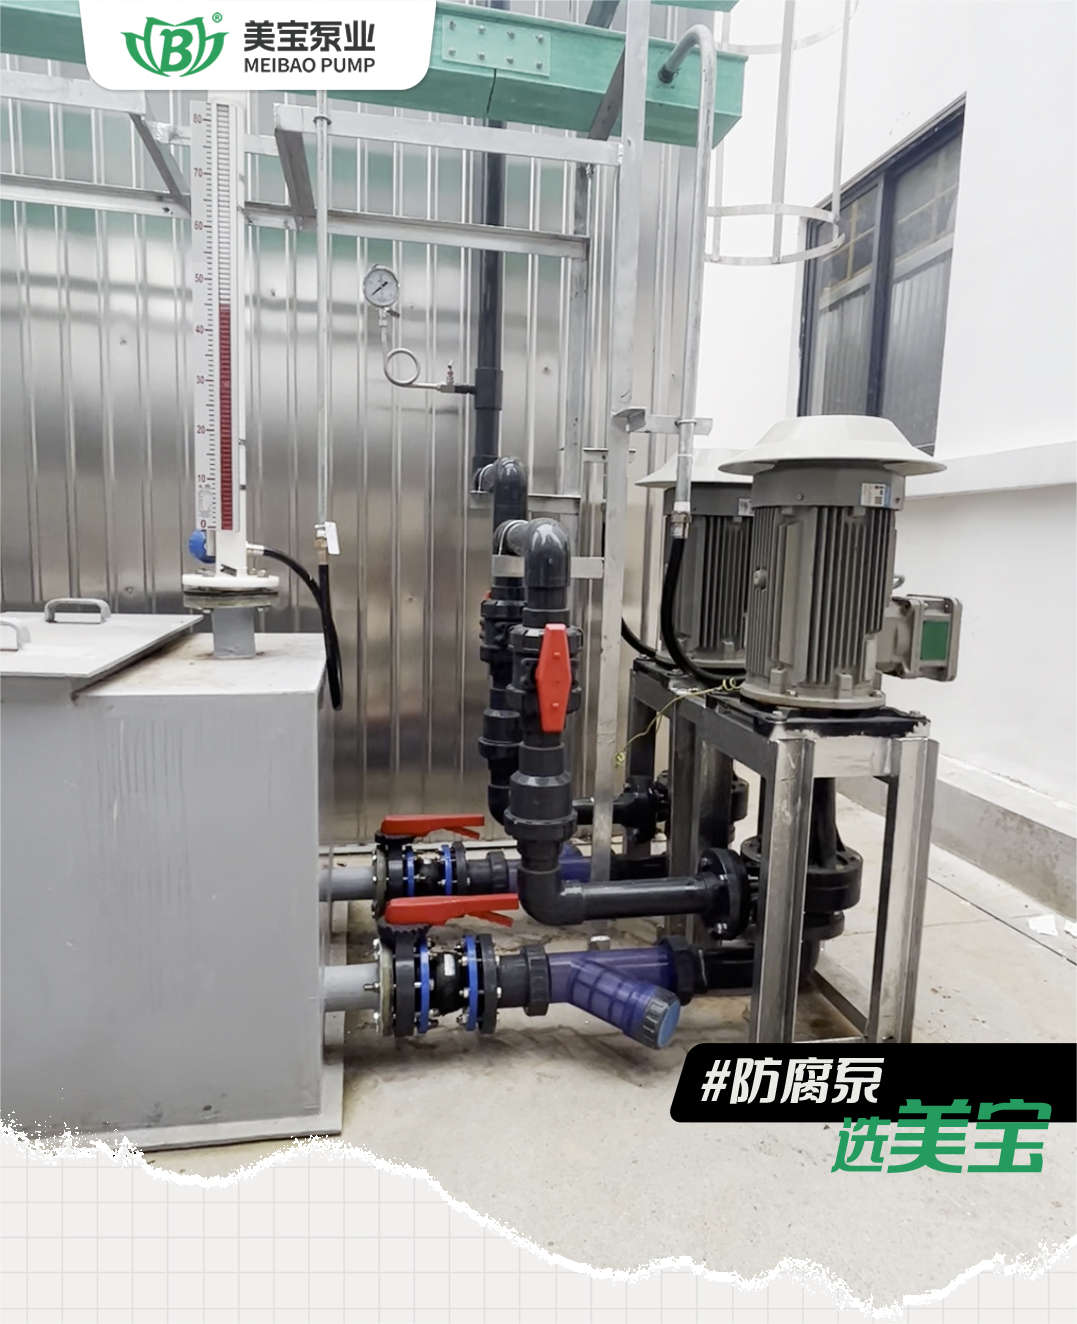 What pumps are used for chemical plant bio-deodorization lye spray?